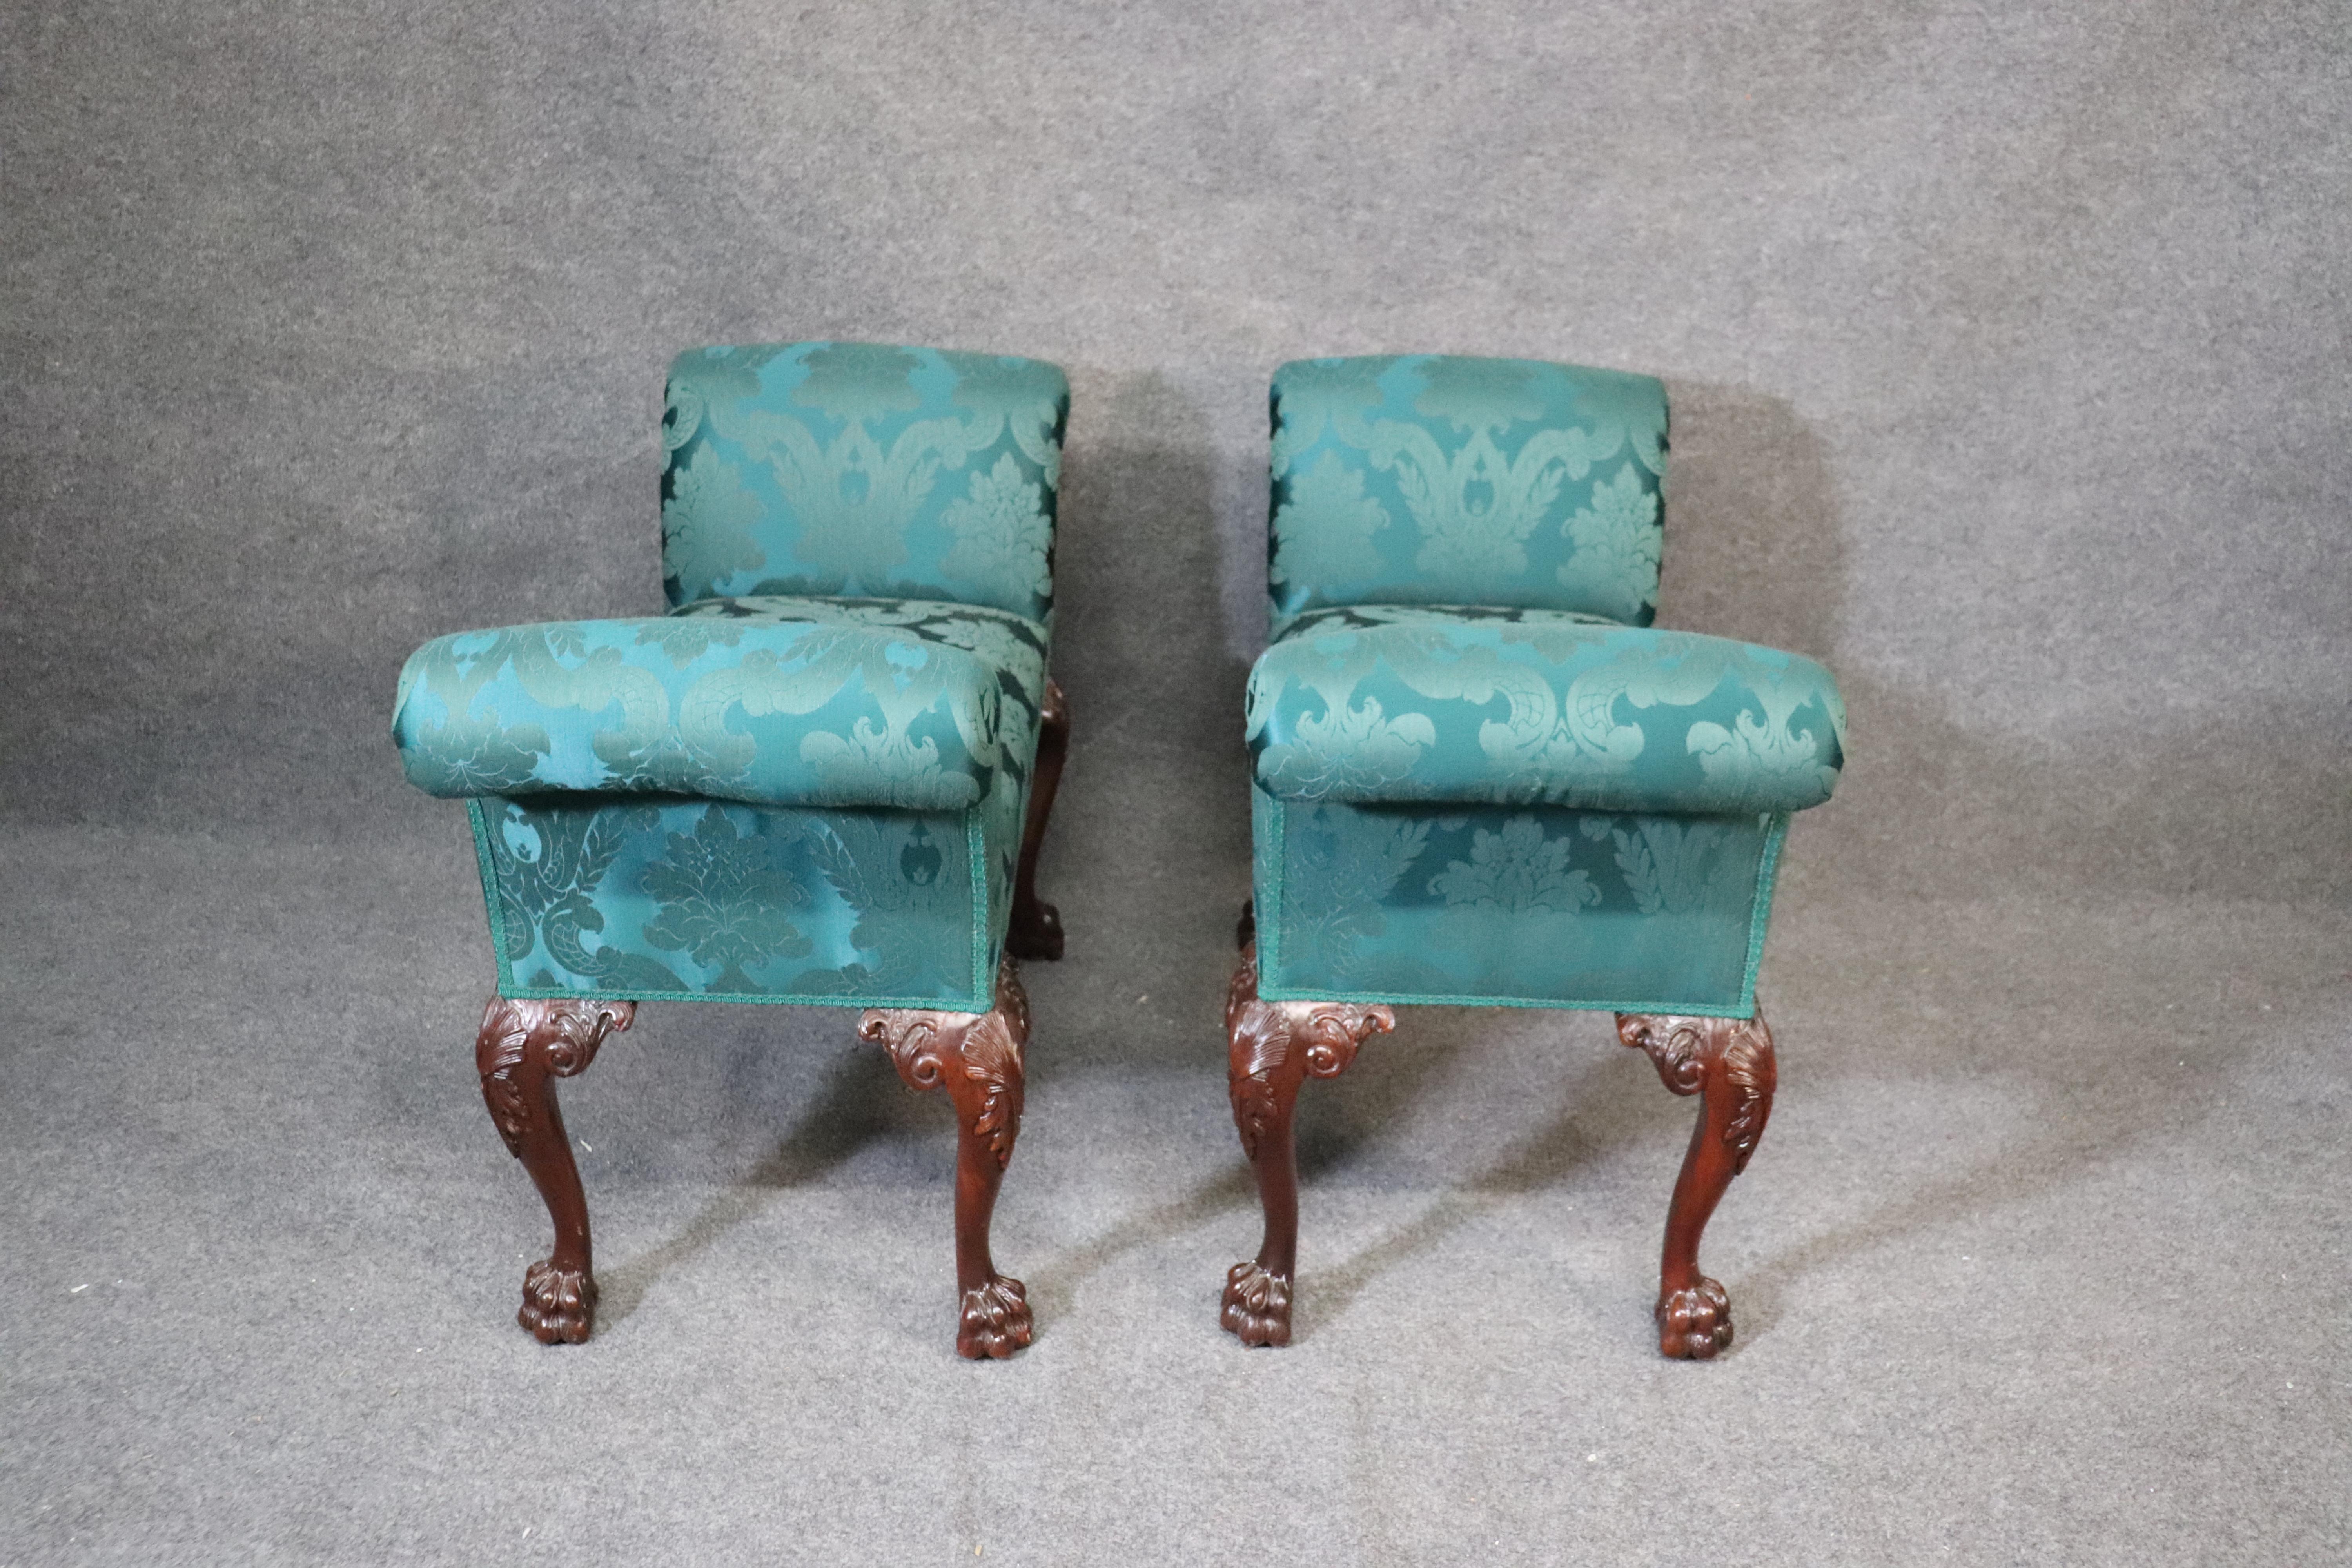 Mid-20th Century Pair of Green Damask Georgian Carved Mahogany Foot Stools Window Benches